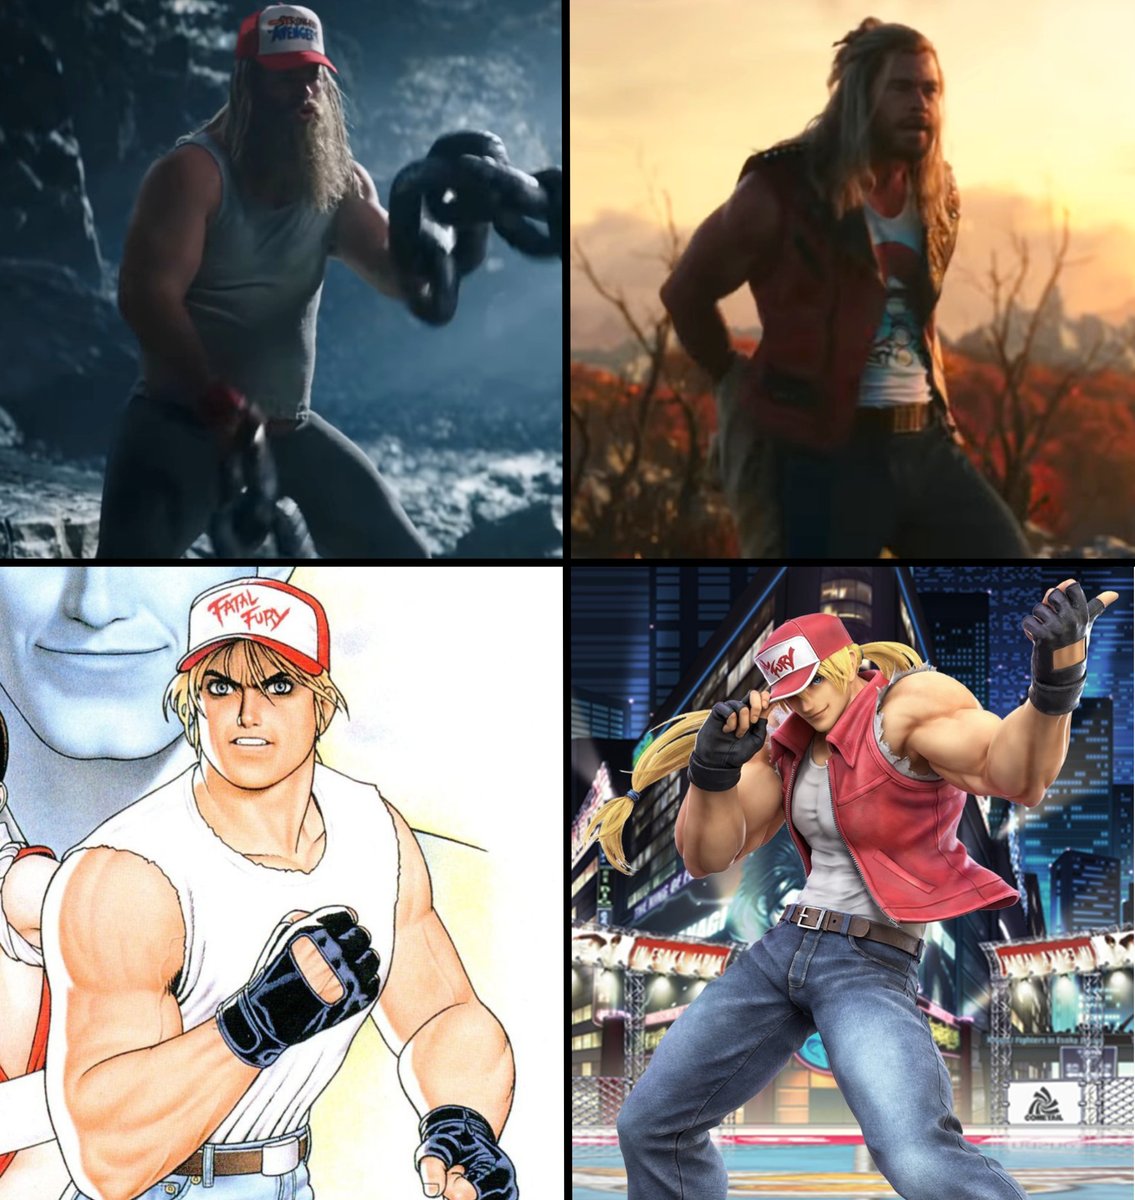 RT @FGC_Daily: You simply cannot tell me Thor doesn't look like the cool hat guy from Smash Bros https://t.co/O9nCQi8lA3